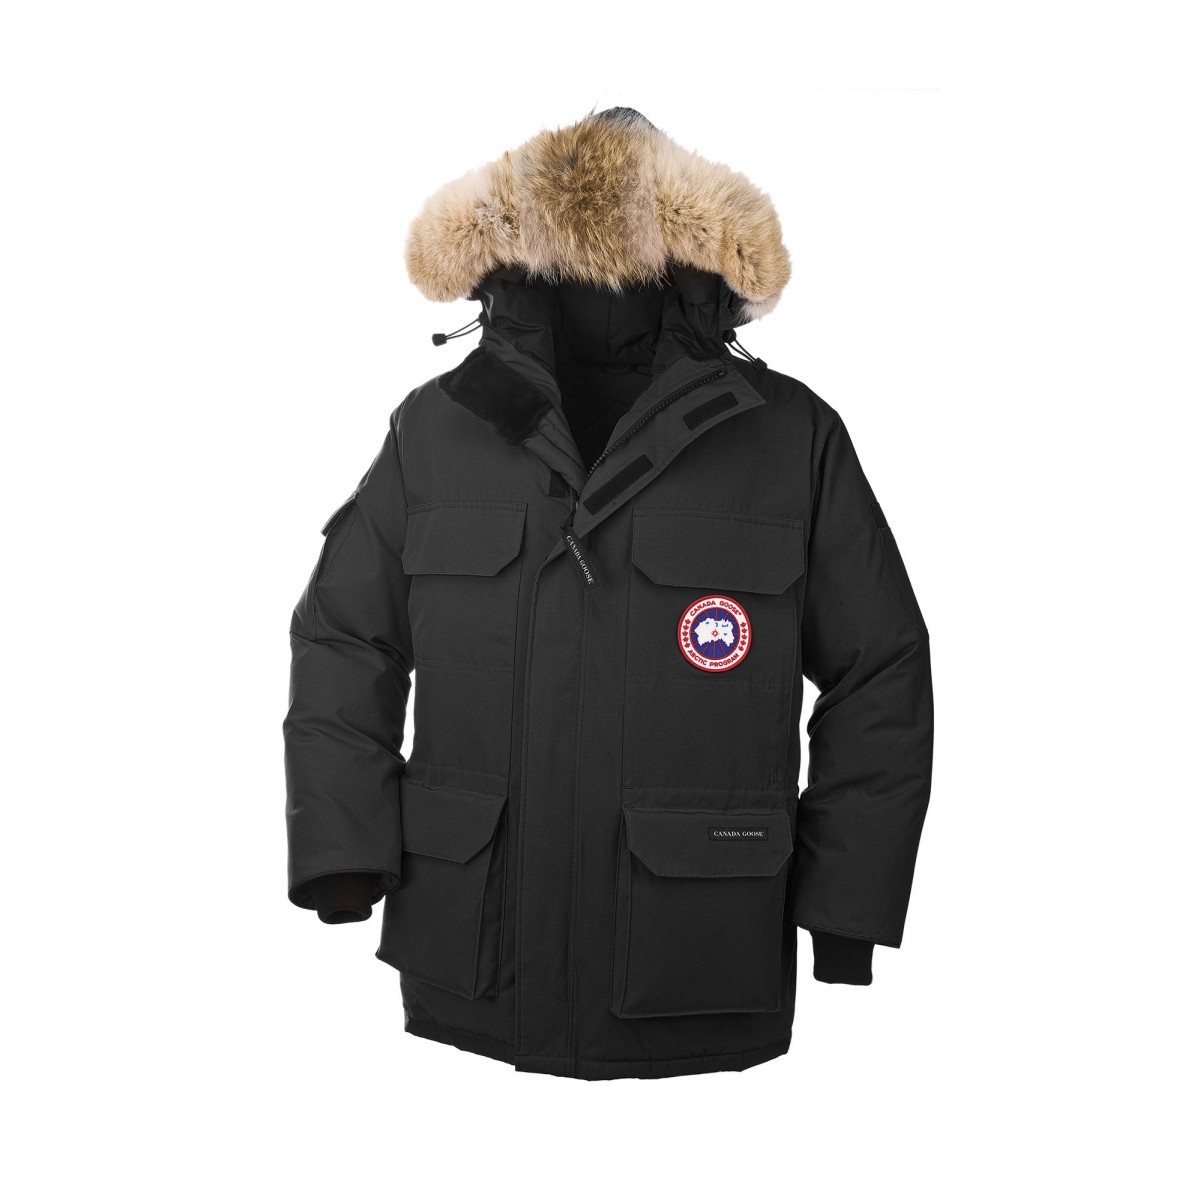 Canada Goose langford parka replica authentic - 70% Off Cheap Canada Goose Jackets Sale